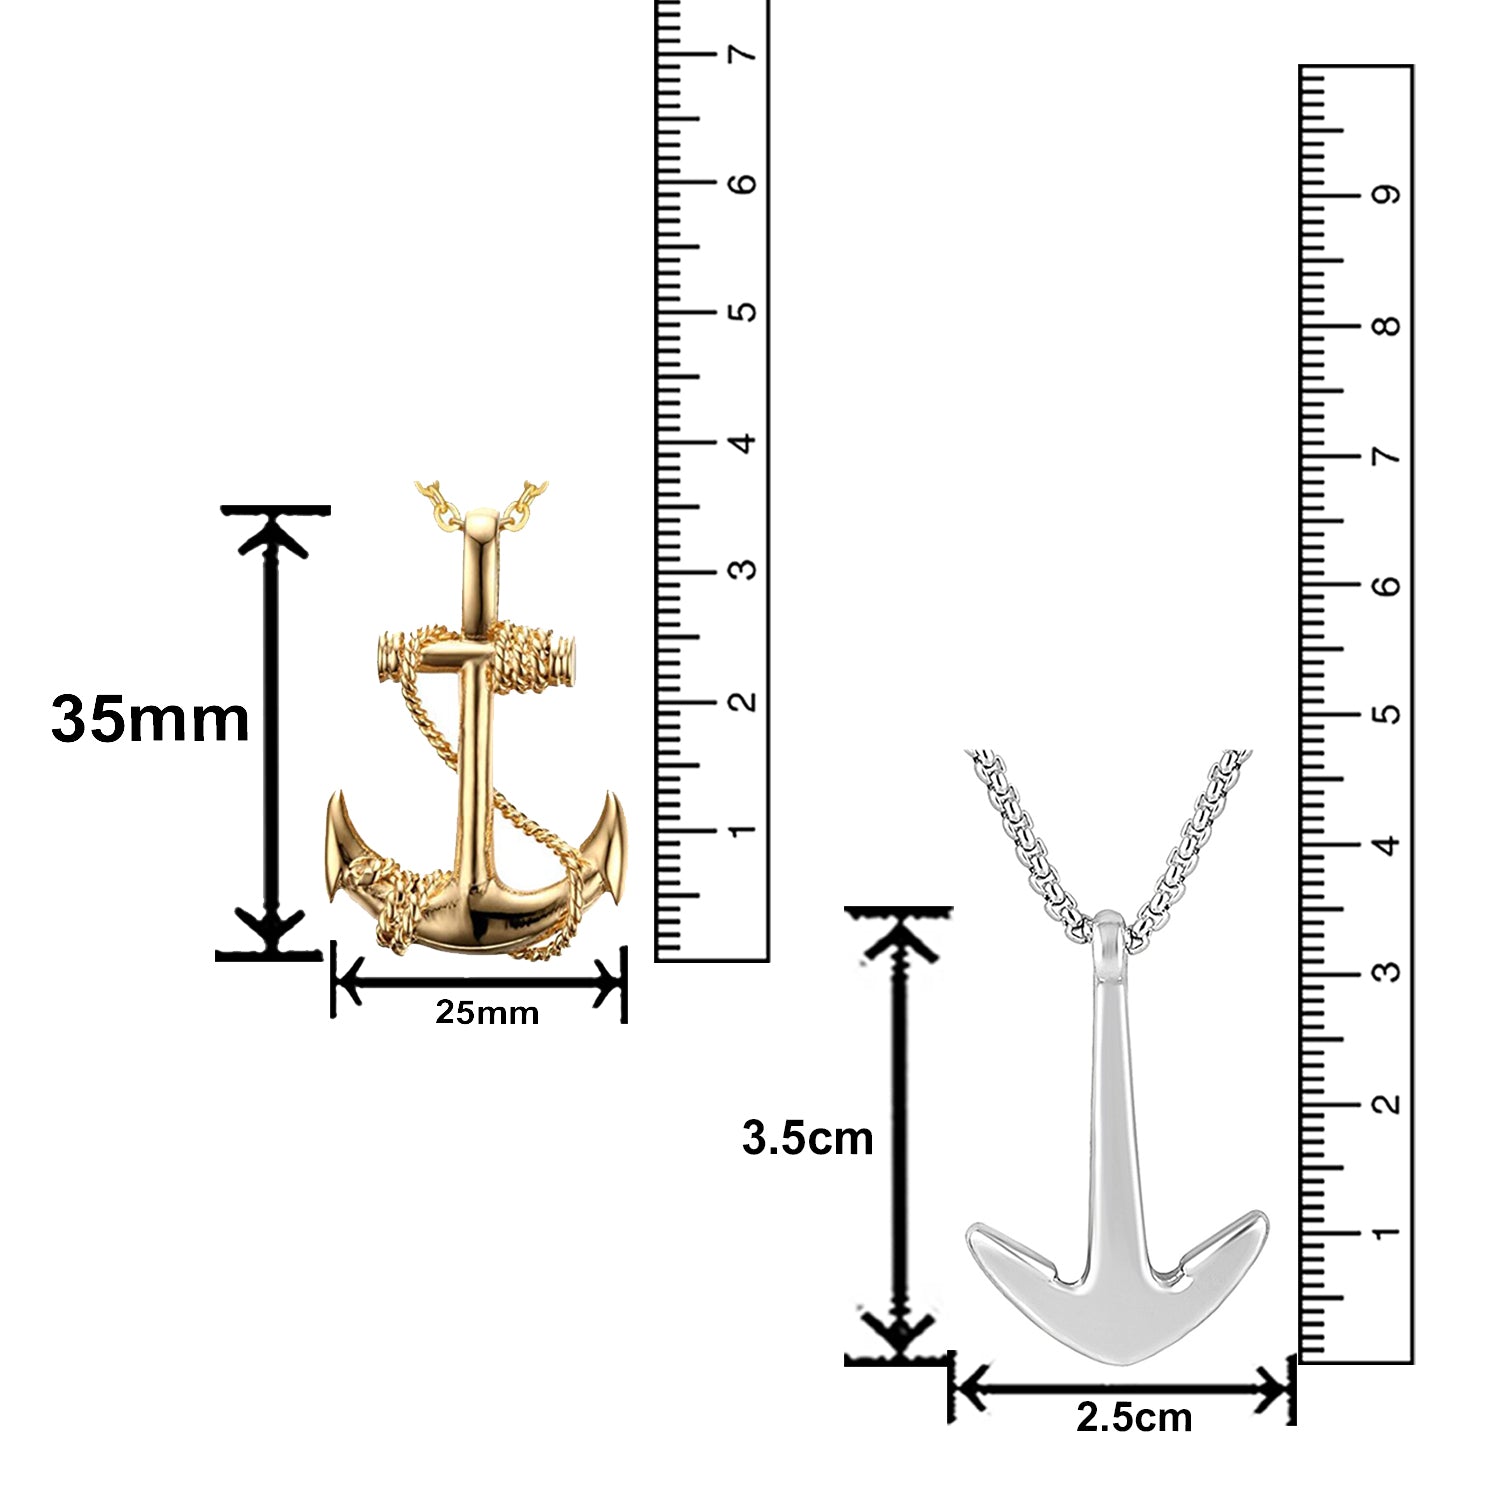 Combo of Black Gun Metal Plated Unisex Ship Anchor Necklace Chain Pendant